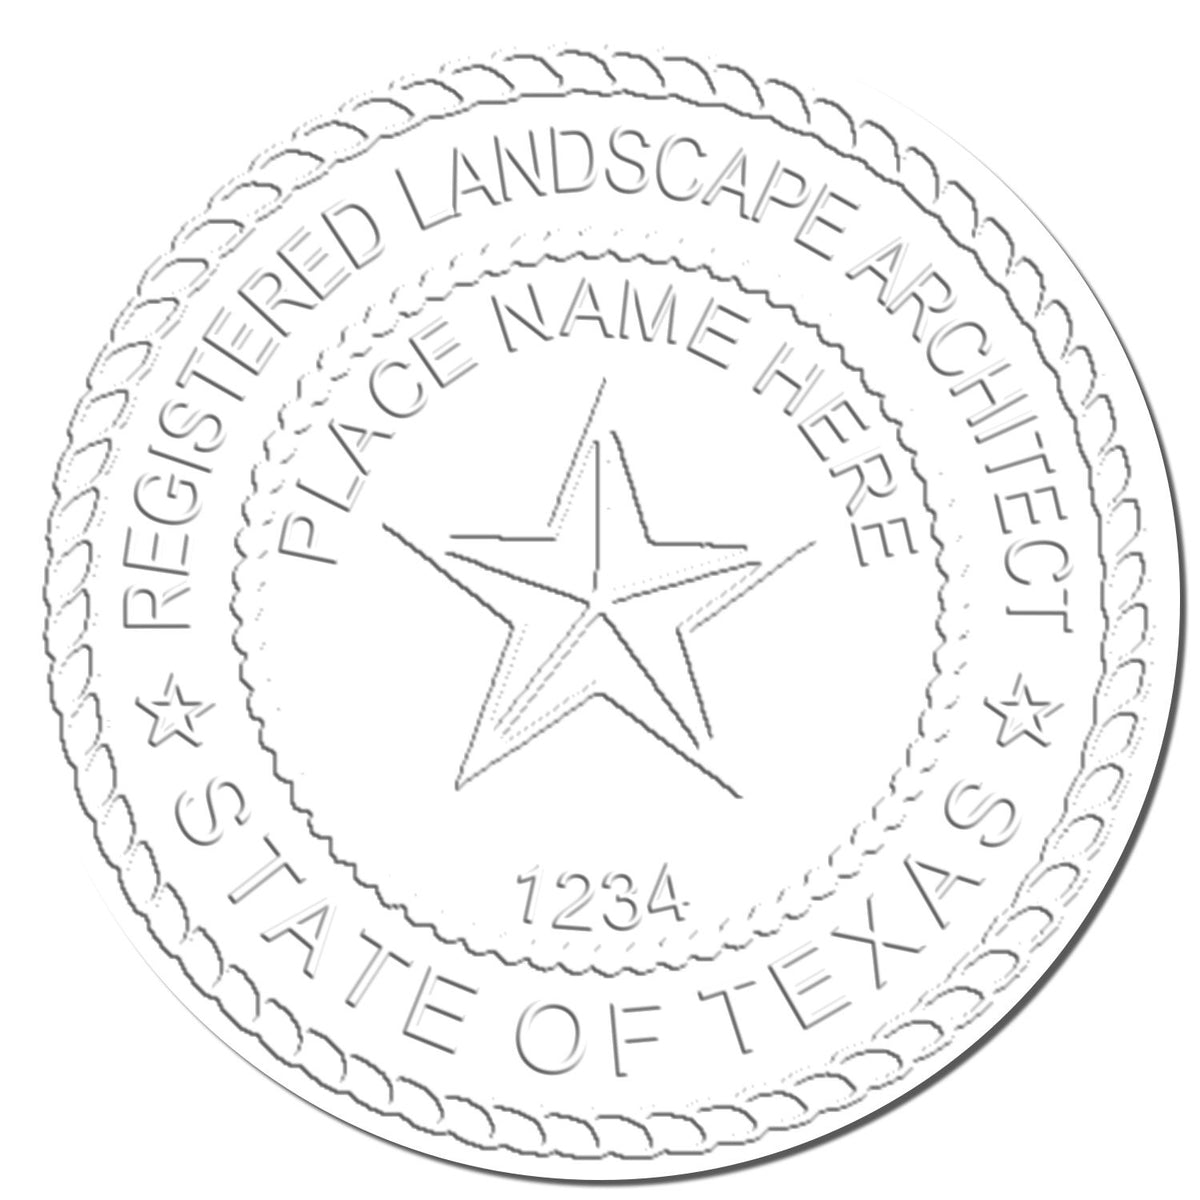 This paper is stamped with a sample imprint of the Hybrid Texas Landscape Architect Seal, signifying its quality and reliability.